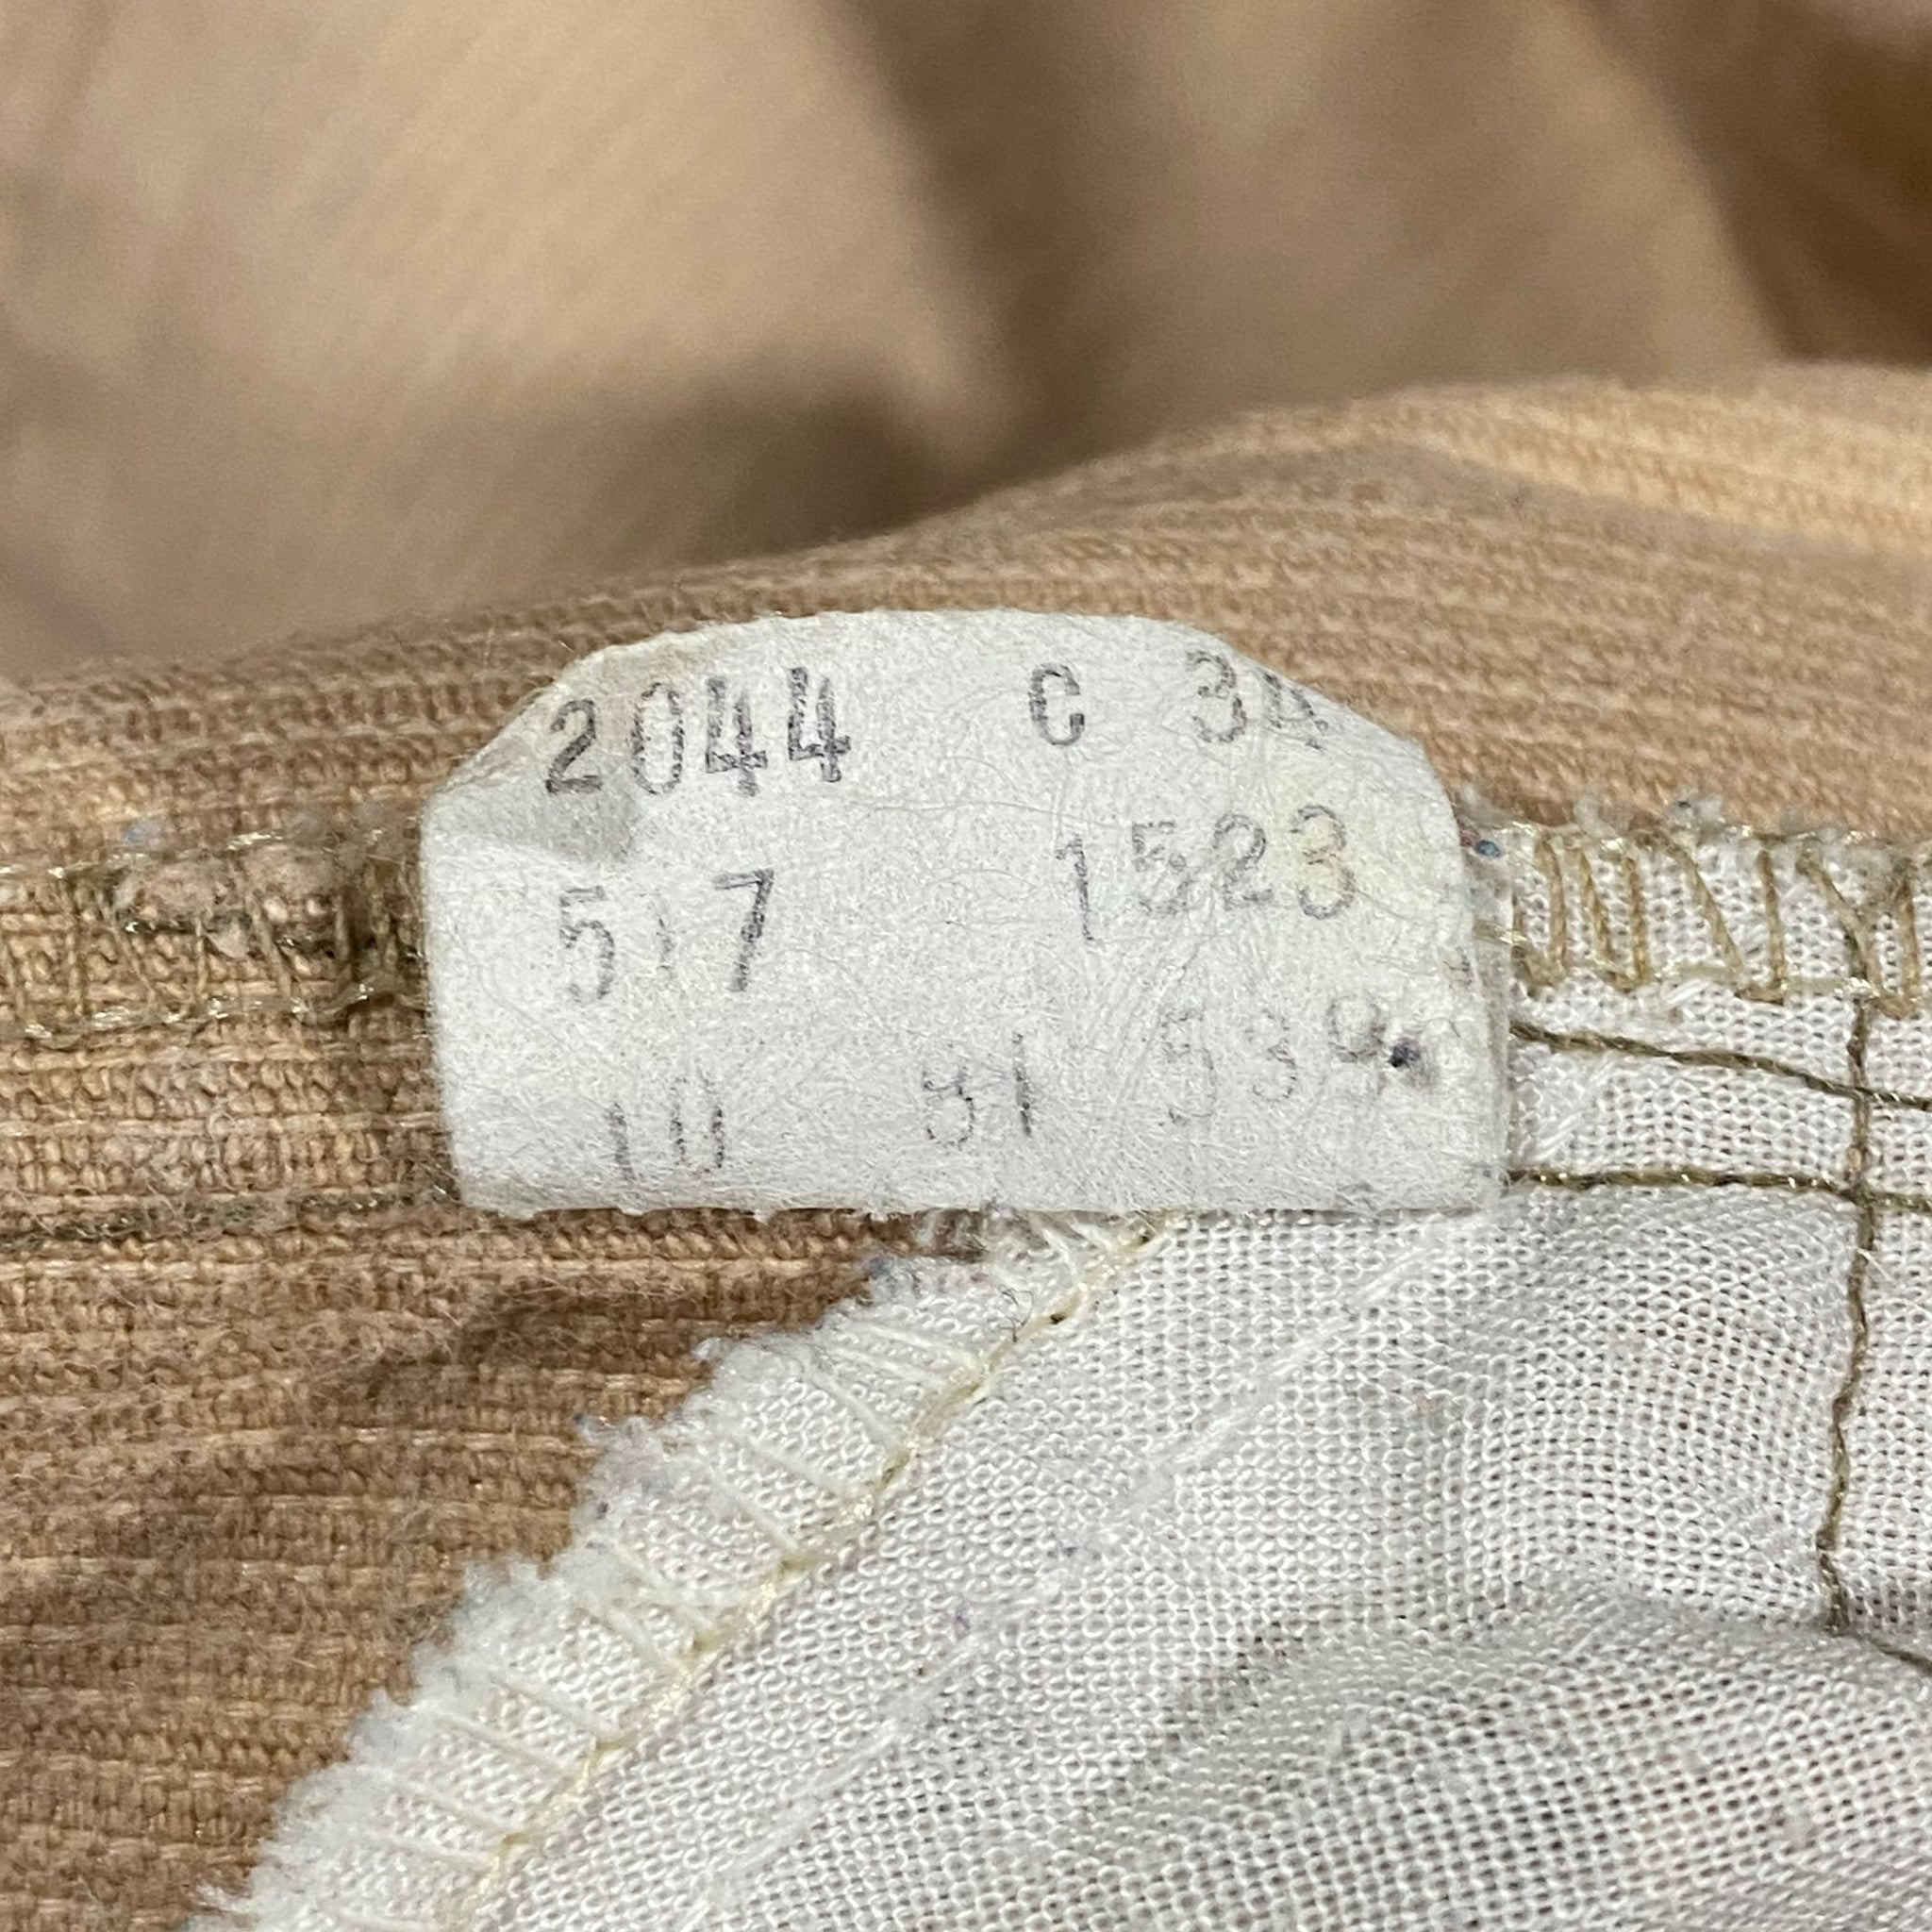 80s Levi’s 517 cords. Made in USA. 37x32.